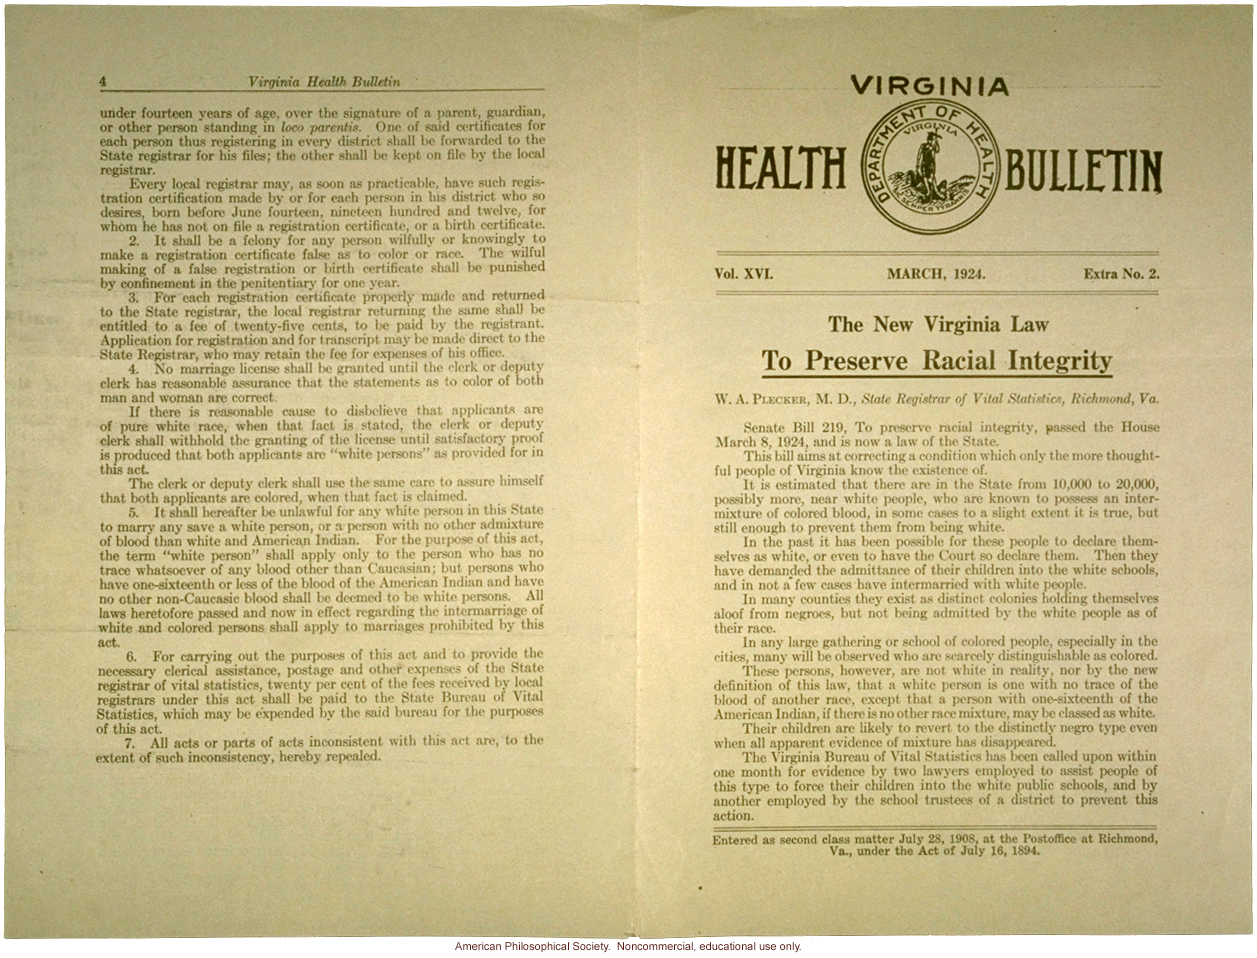 &quote;The New Virginia Law to Preserve Racial Integrity,&quote; by W. A. Plecker, Virginia Health Bulletin (vol. 16:2)